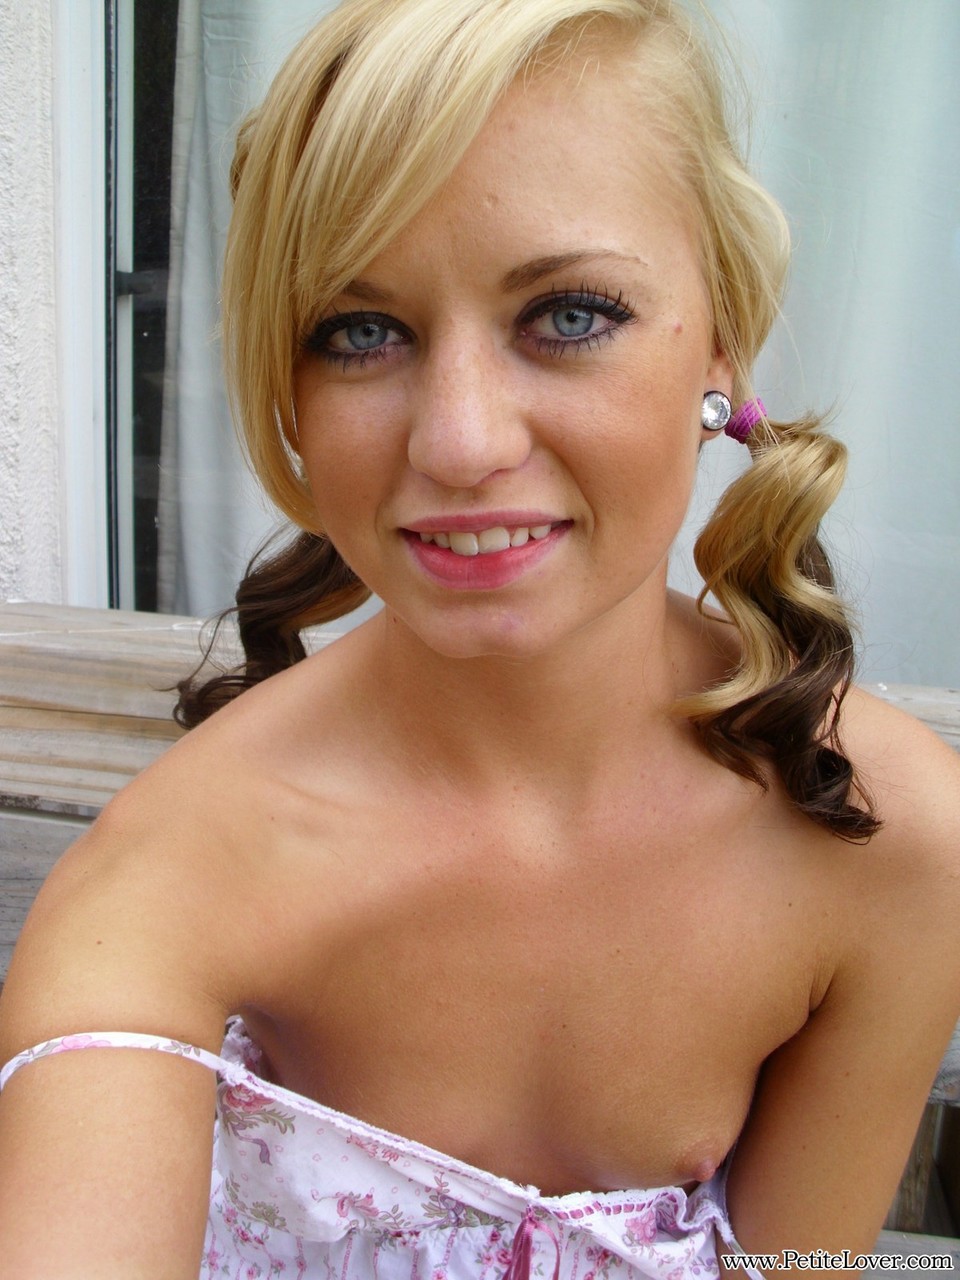 Cute blonde Tiff in pigtails showing off her wee small tits & tiny bald pussy foto porno #428478640 | Petite Lover Pics, Tiff, Amateur, porno mobile